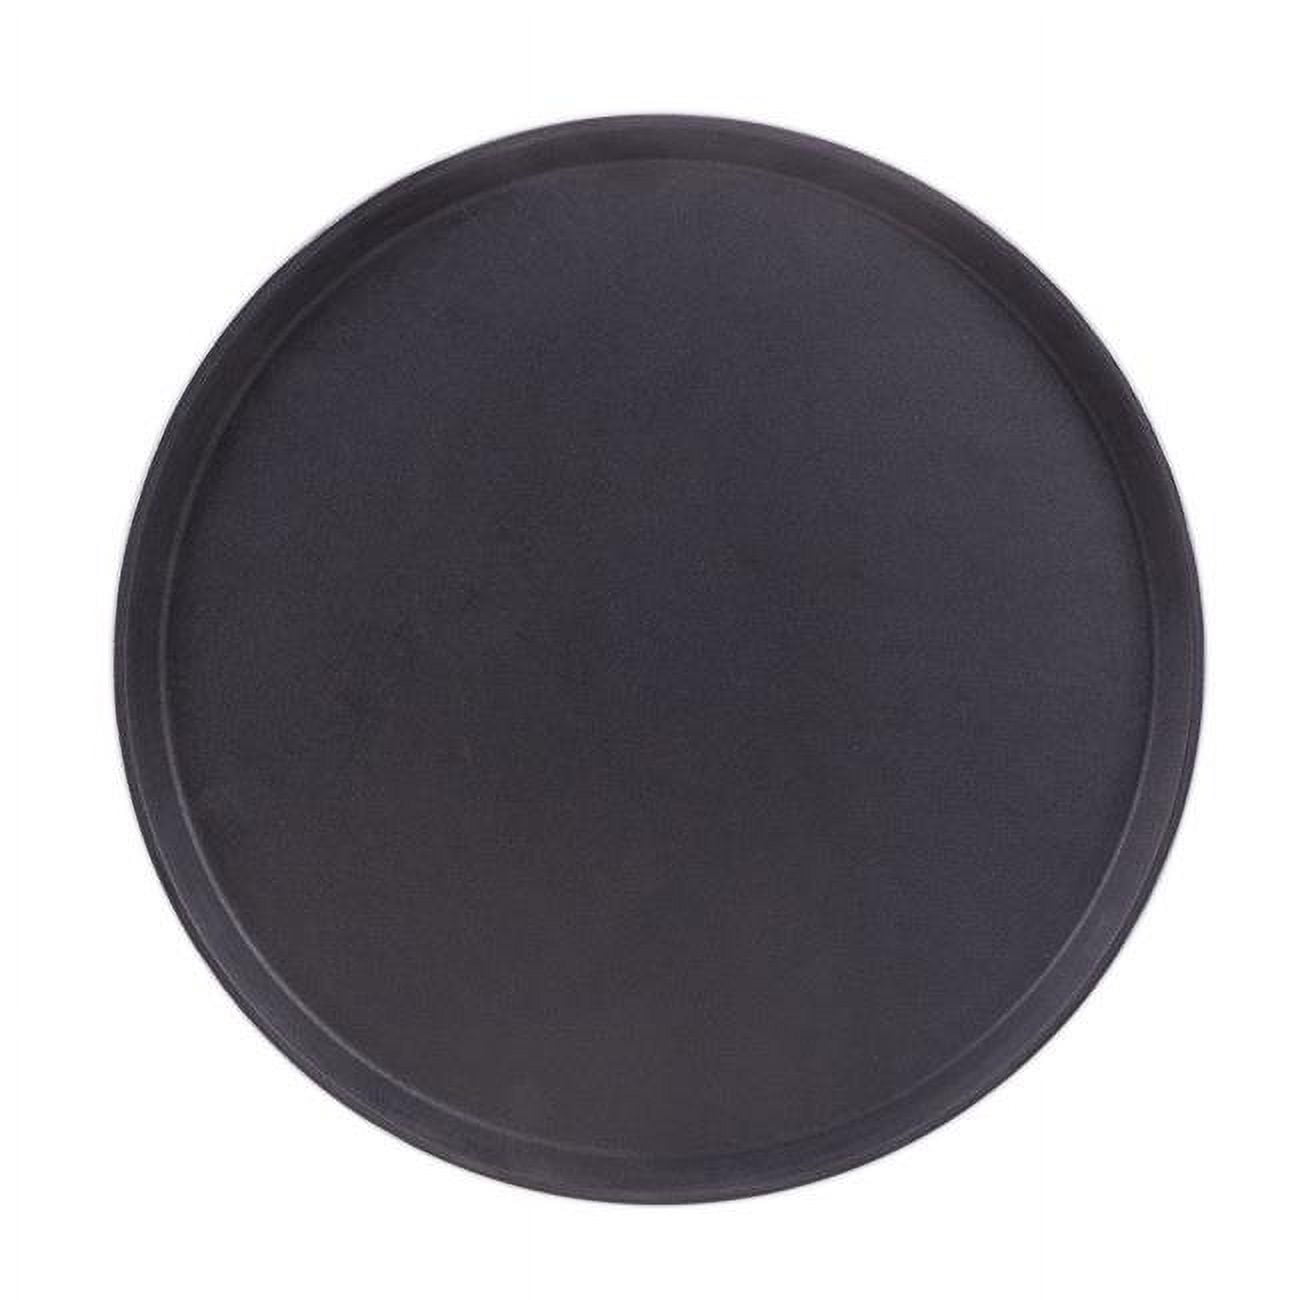 Kcaf-002 14 In. Round Rubber-lined Serving Tray